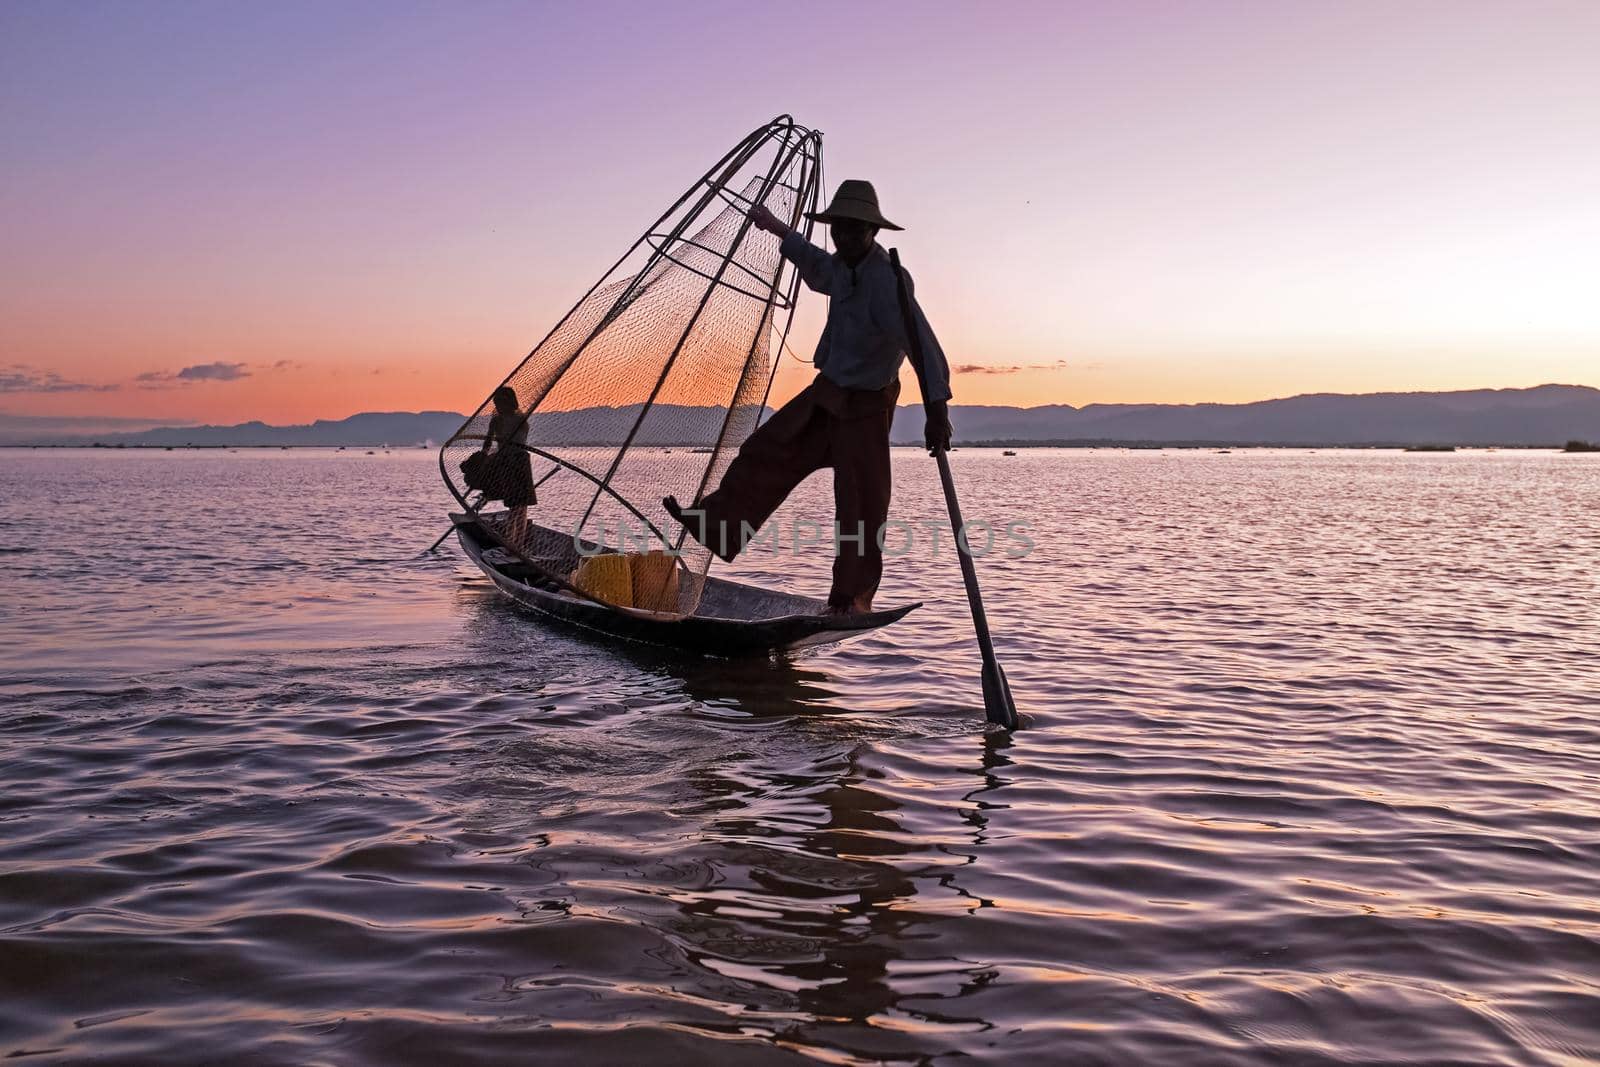 Fishing man on the Inle Lake in Myanmar at sunset by devy